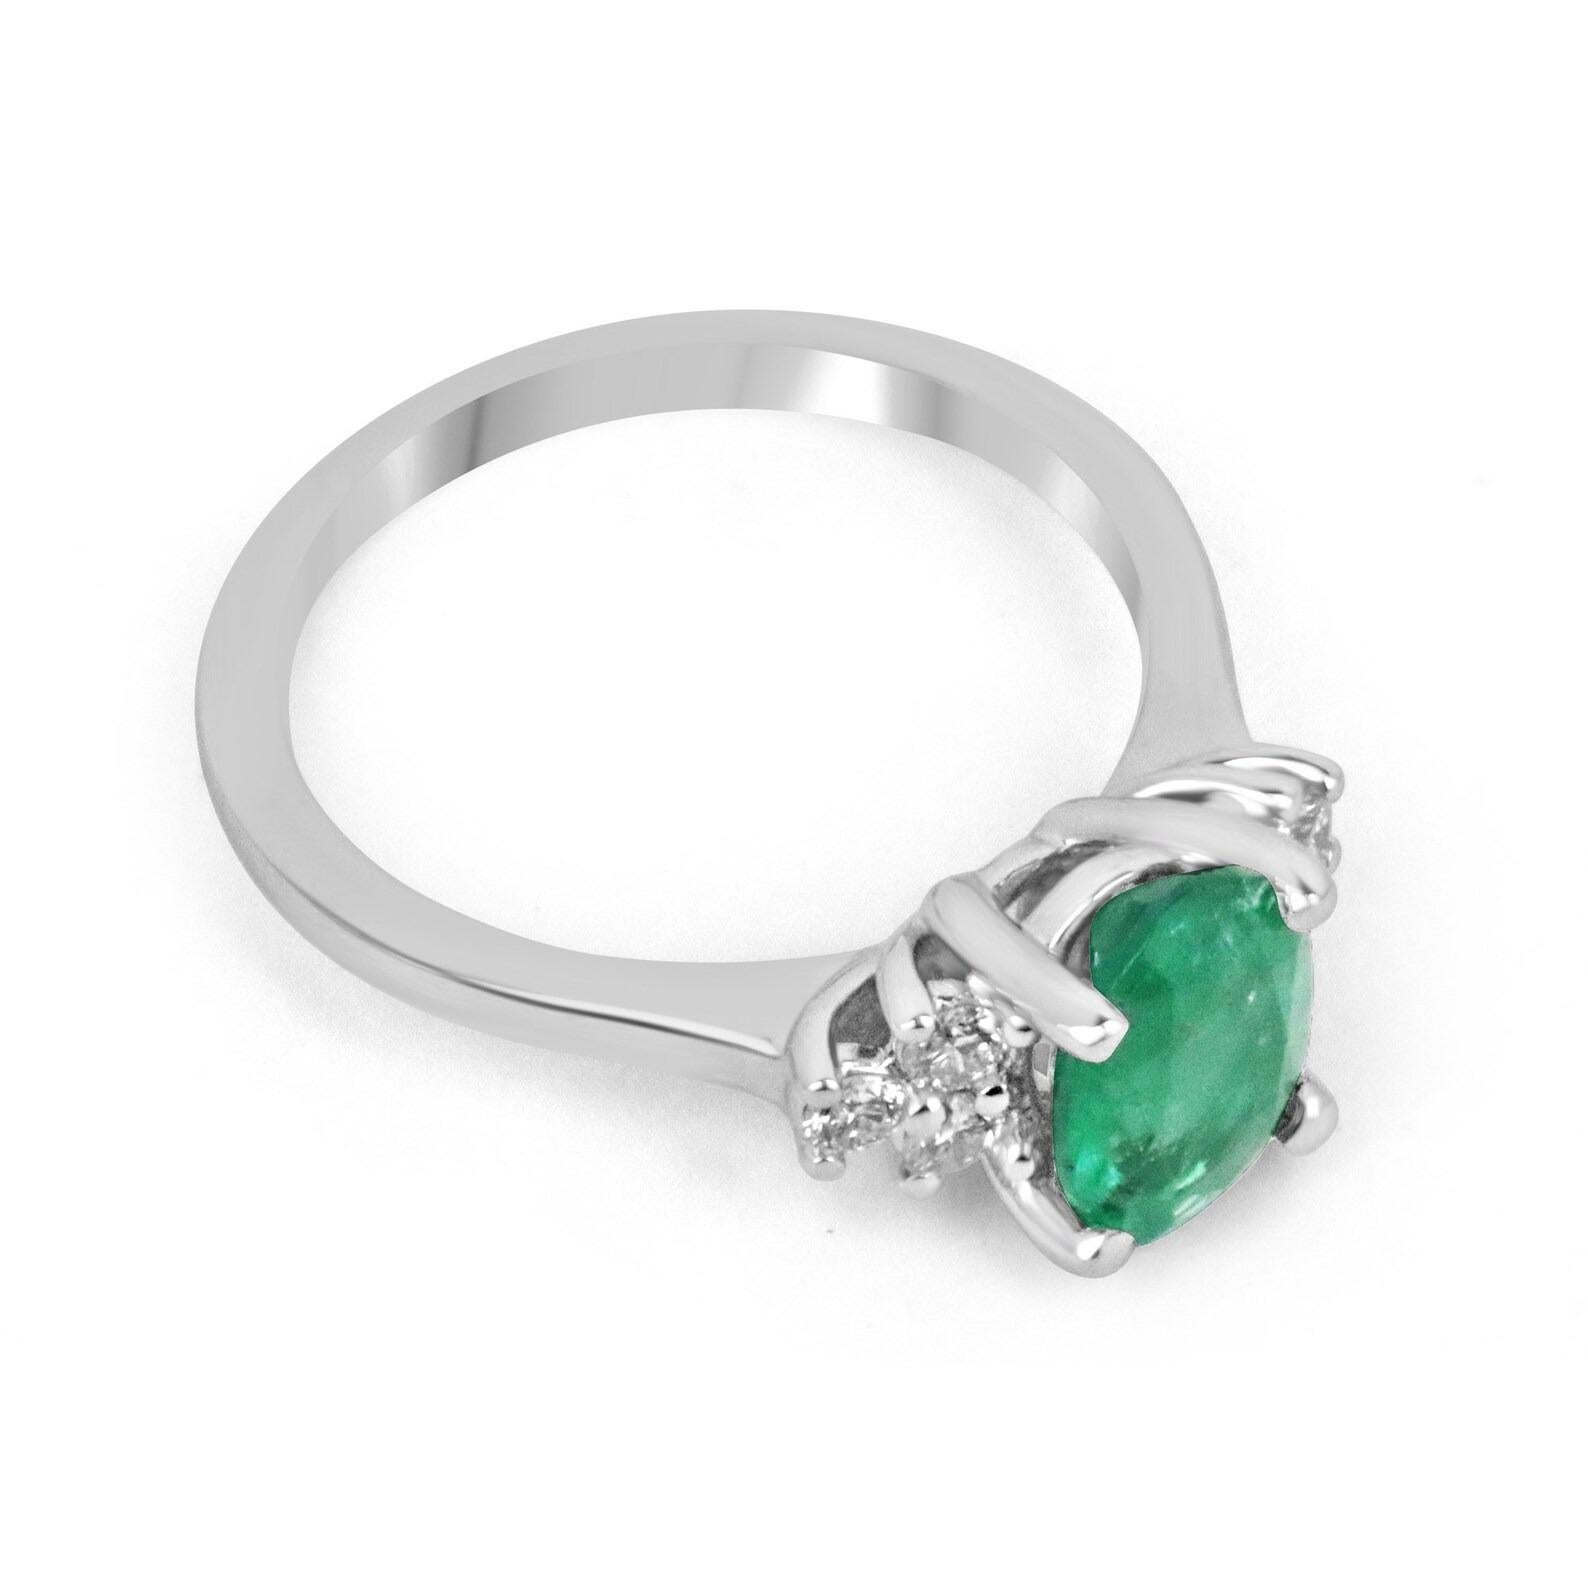 A stunning, classic oval emerald and round diamond engagement/right-hand ring 14K. The center stone features a lovely 1.53-carat, natural oval cut emerald that showcases excellent shine and a rare medium dark green color. Accenting the precious